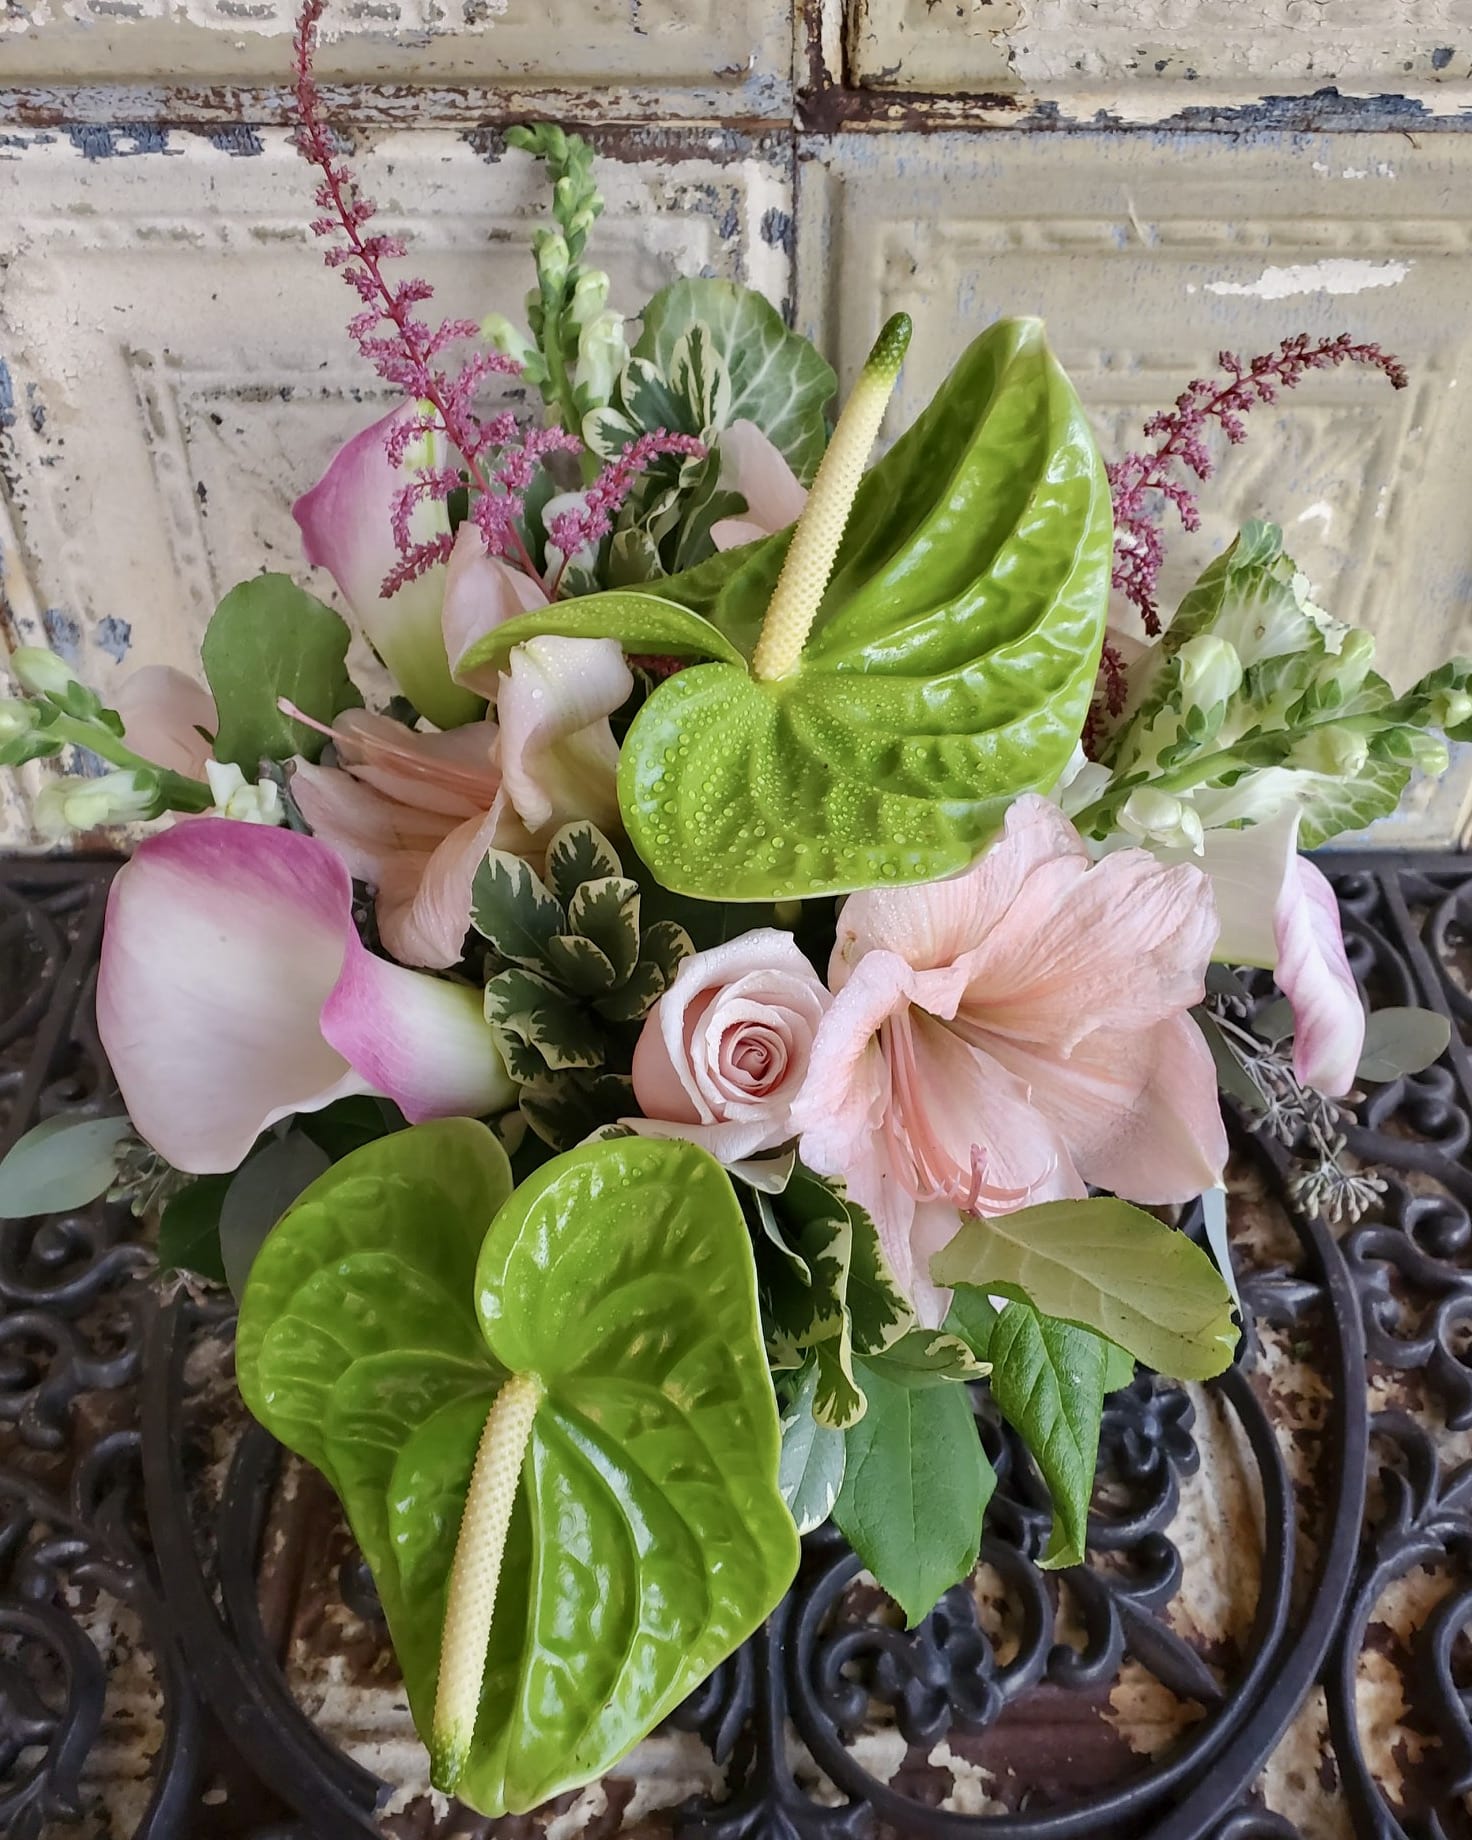 Louisa May Alcott - Feel pretty in pink with this stunning arrangement of anthurium, amaryllis, calla lilies, kale, roses, snapdragons, eucalyptus, astilbe, and greens.